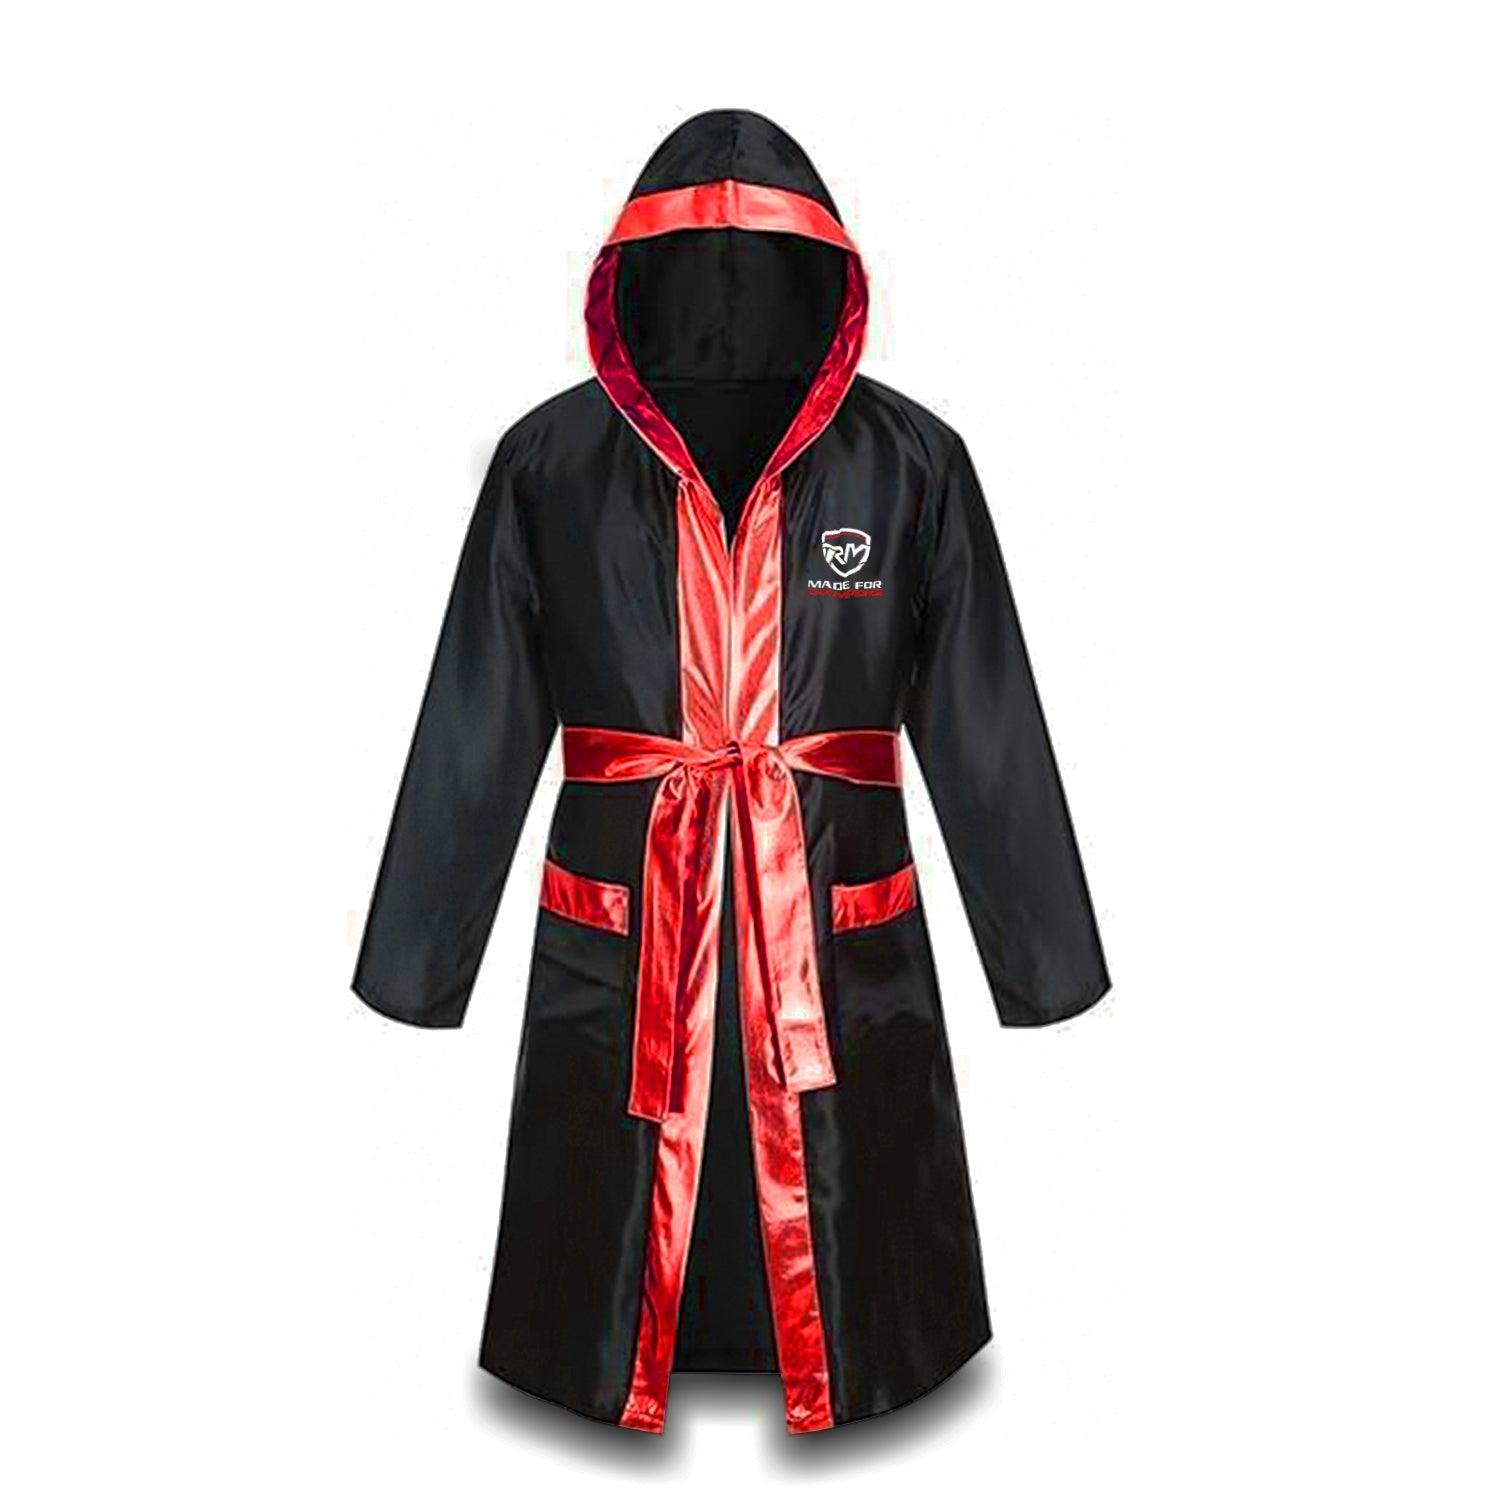 RingMaster Sports Champion Series Boxing Fight Robe Black & Red Gown Image 1